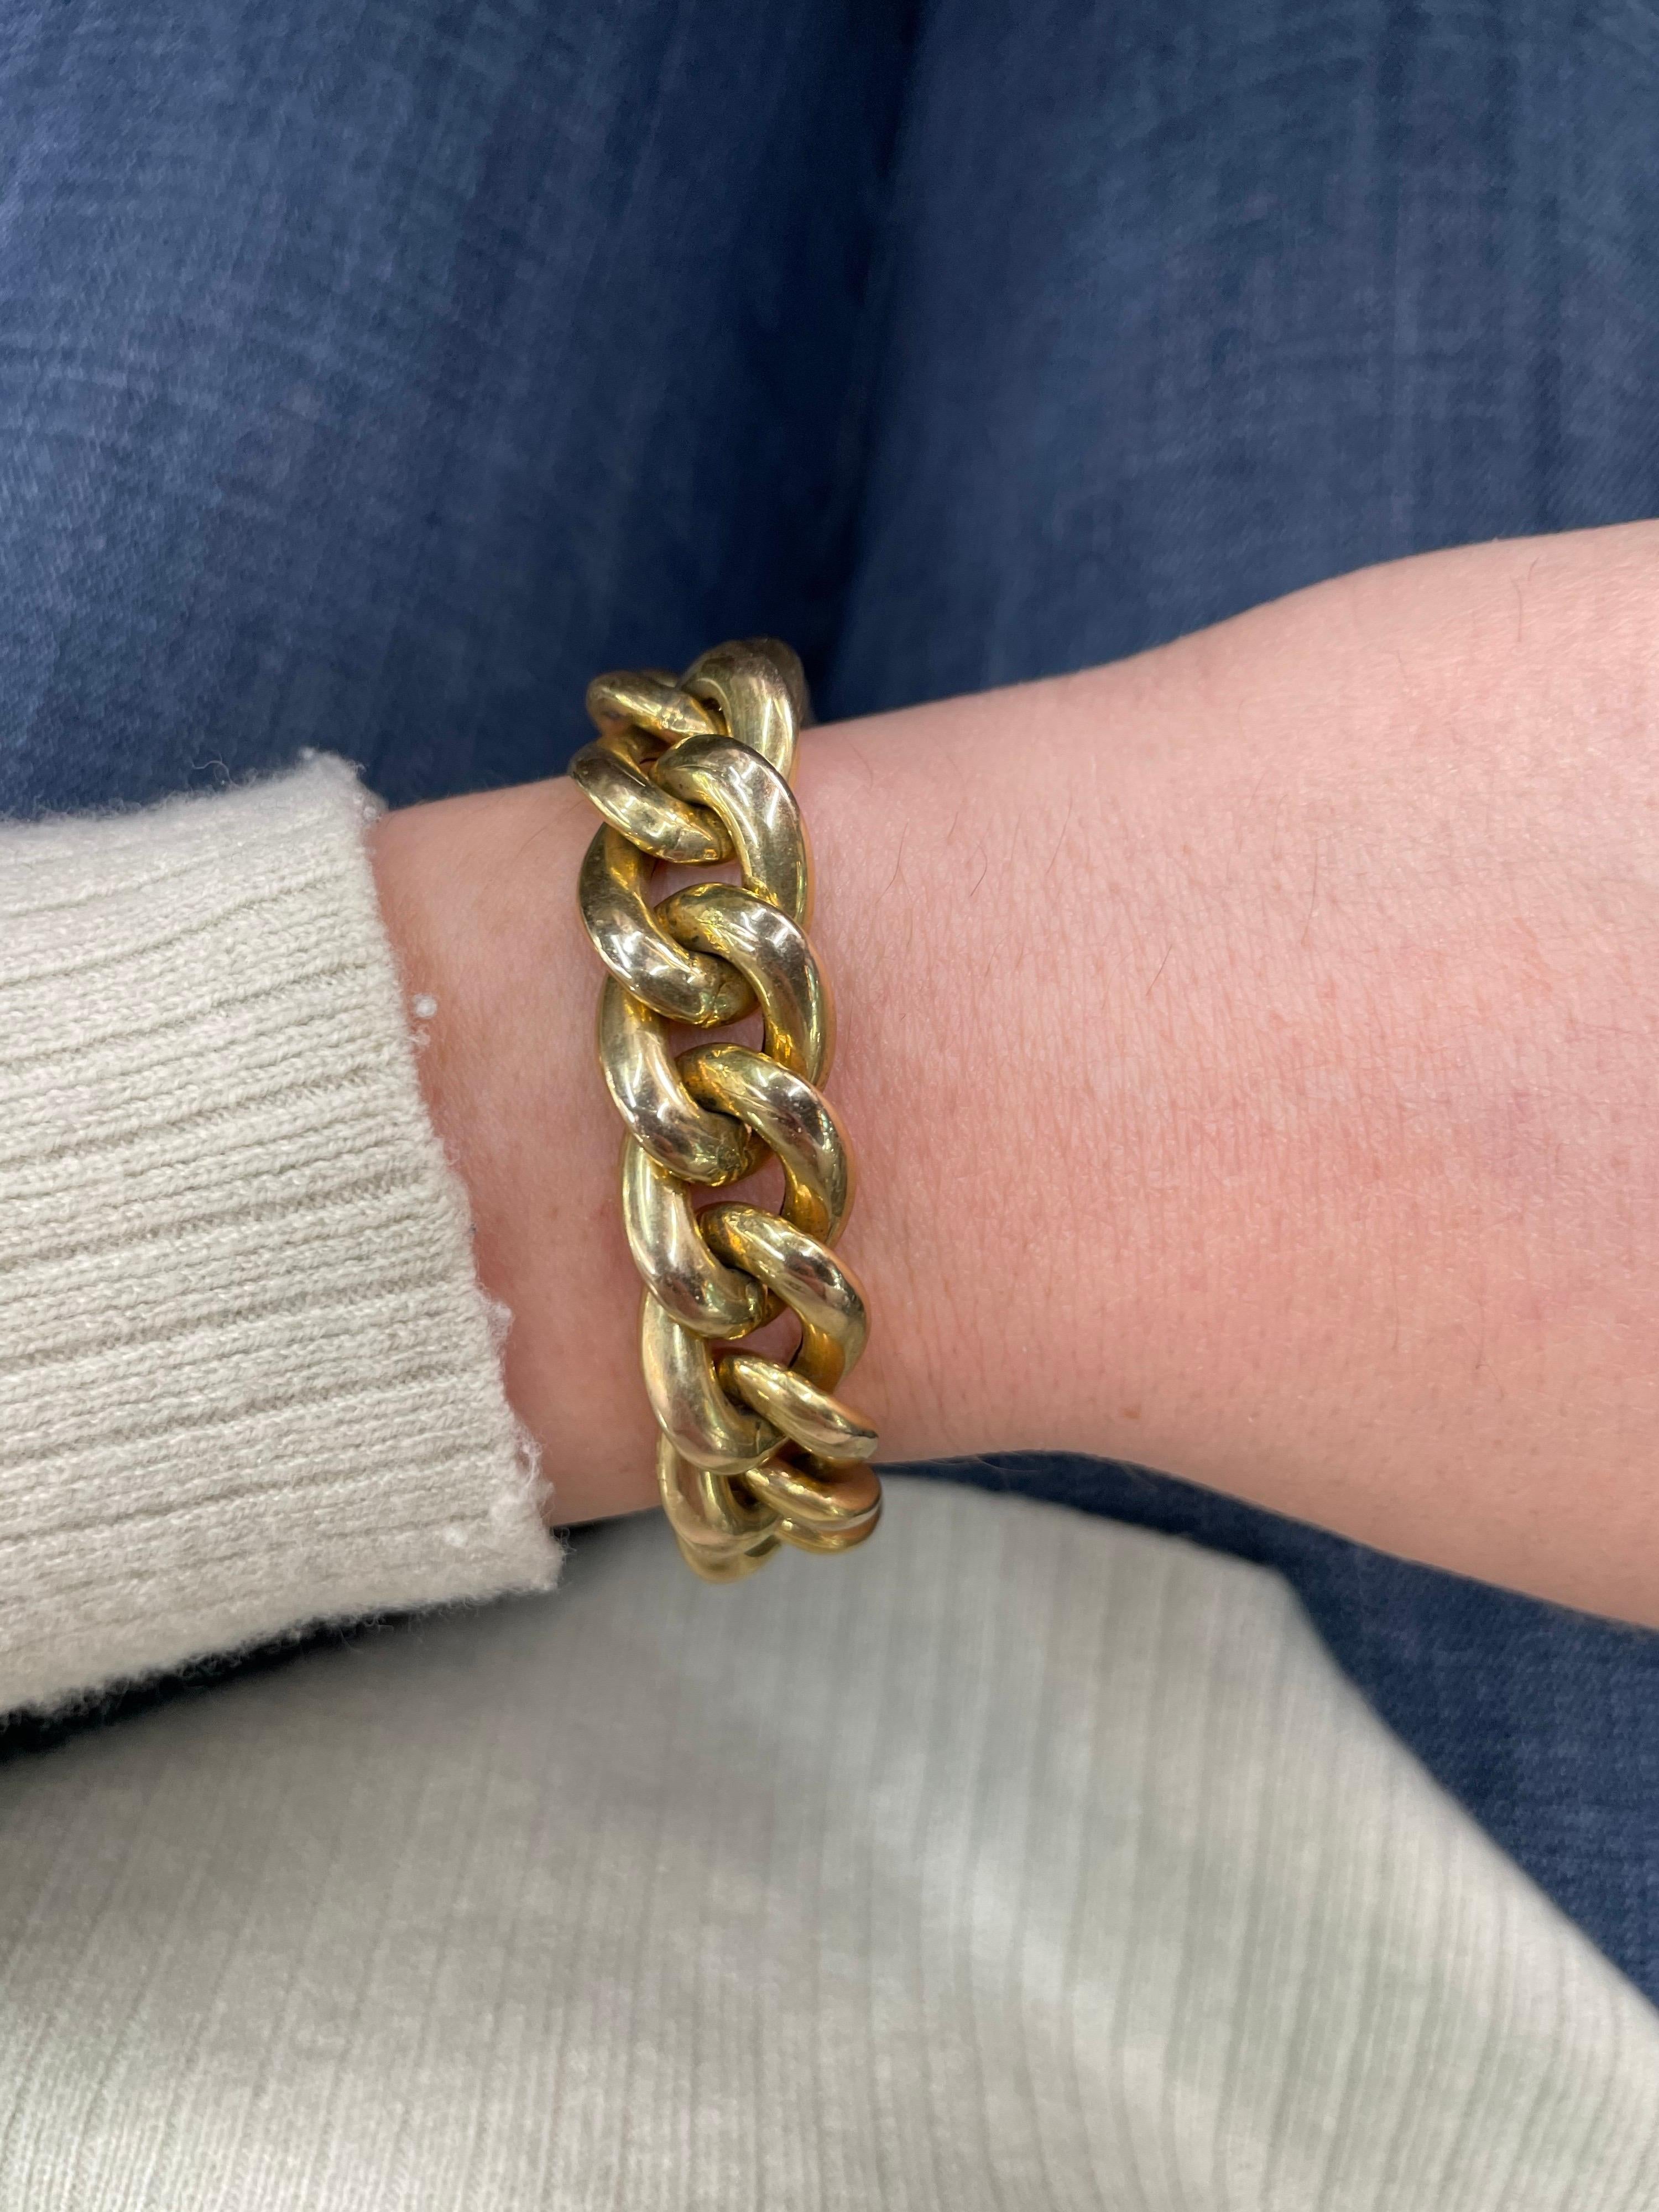 Contemporary 14 Karat Yellow Gold Link Bracelet 23.4 Grams, Made in Italy